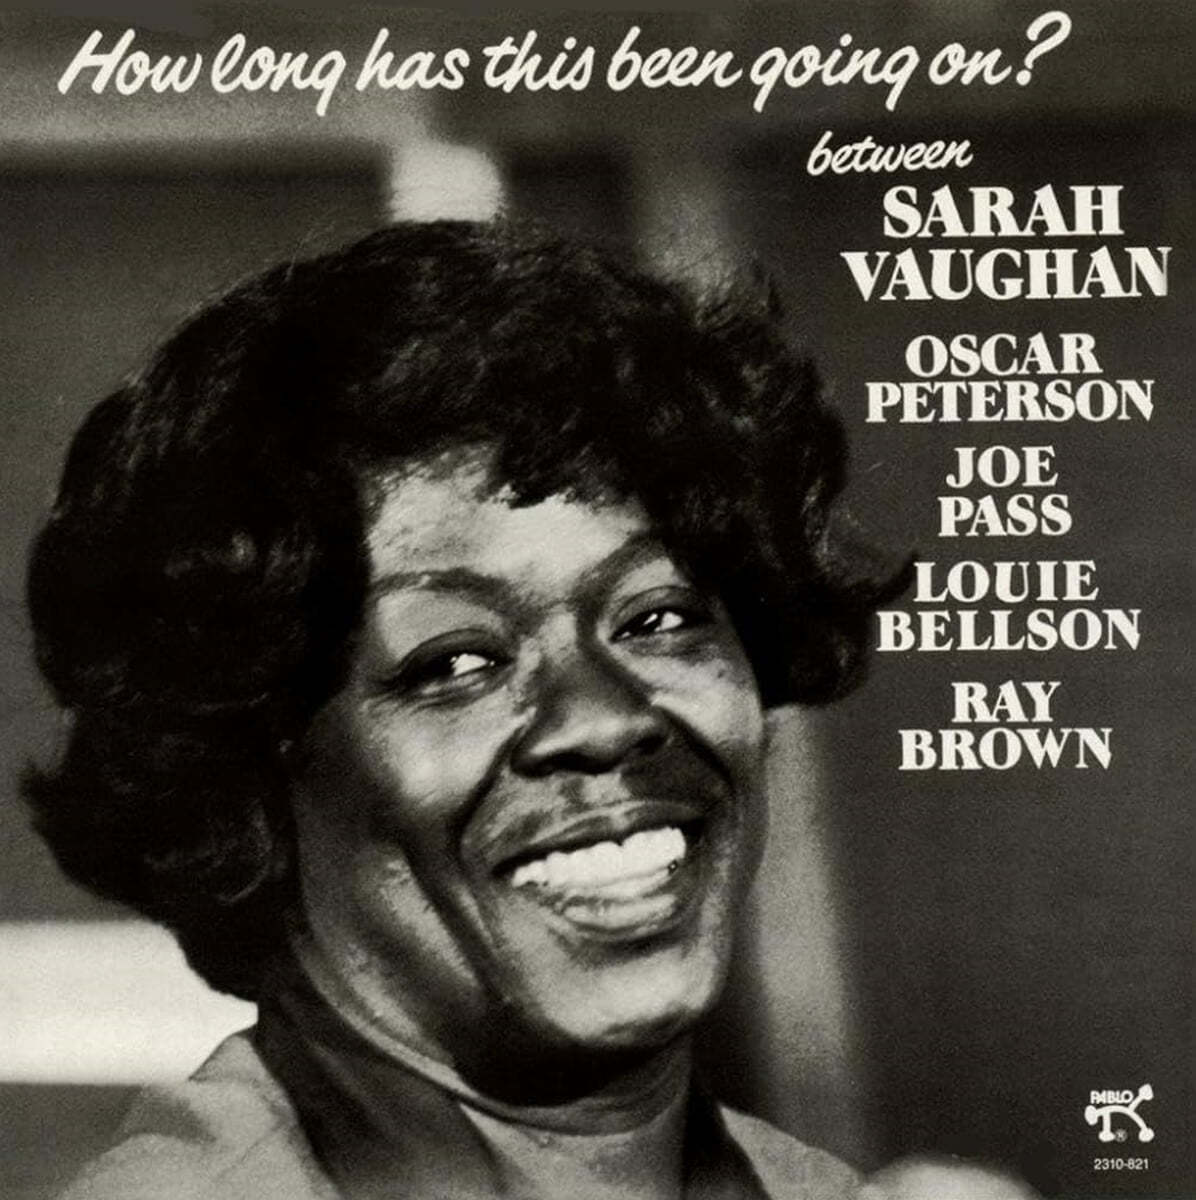 Sarah Vaughan - How Long Has This Been Going On